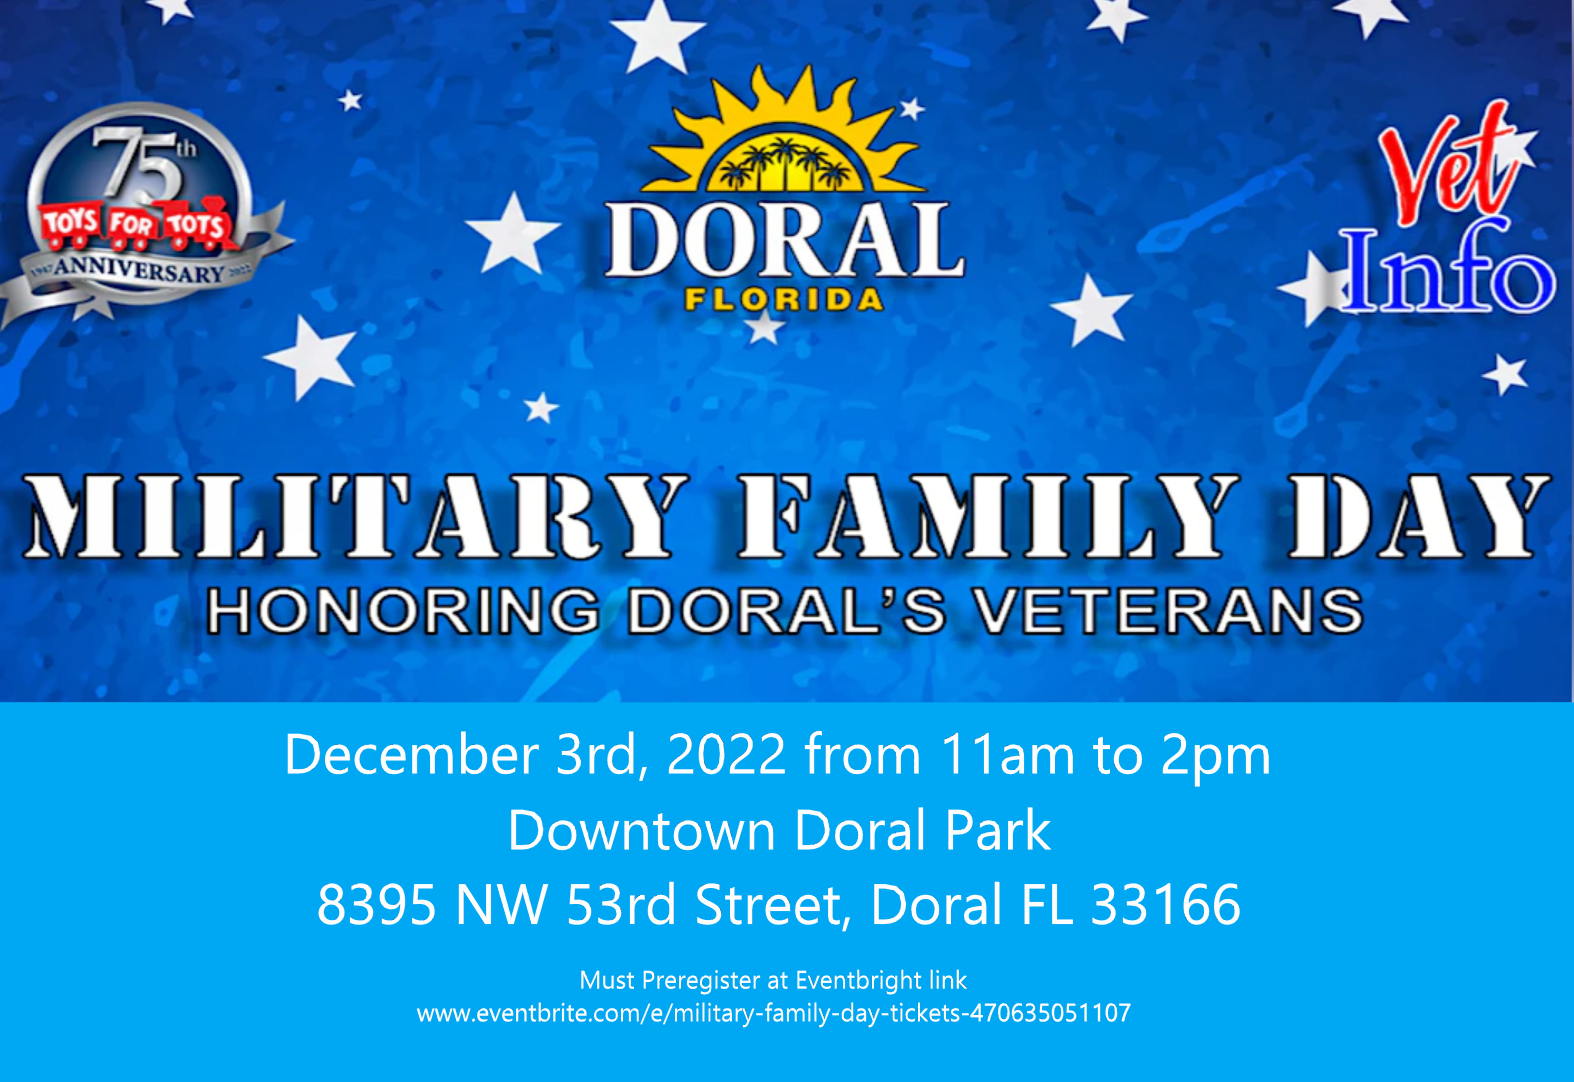 Doral Military Family Day